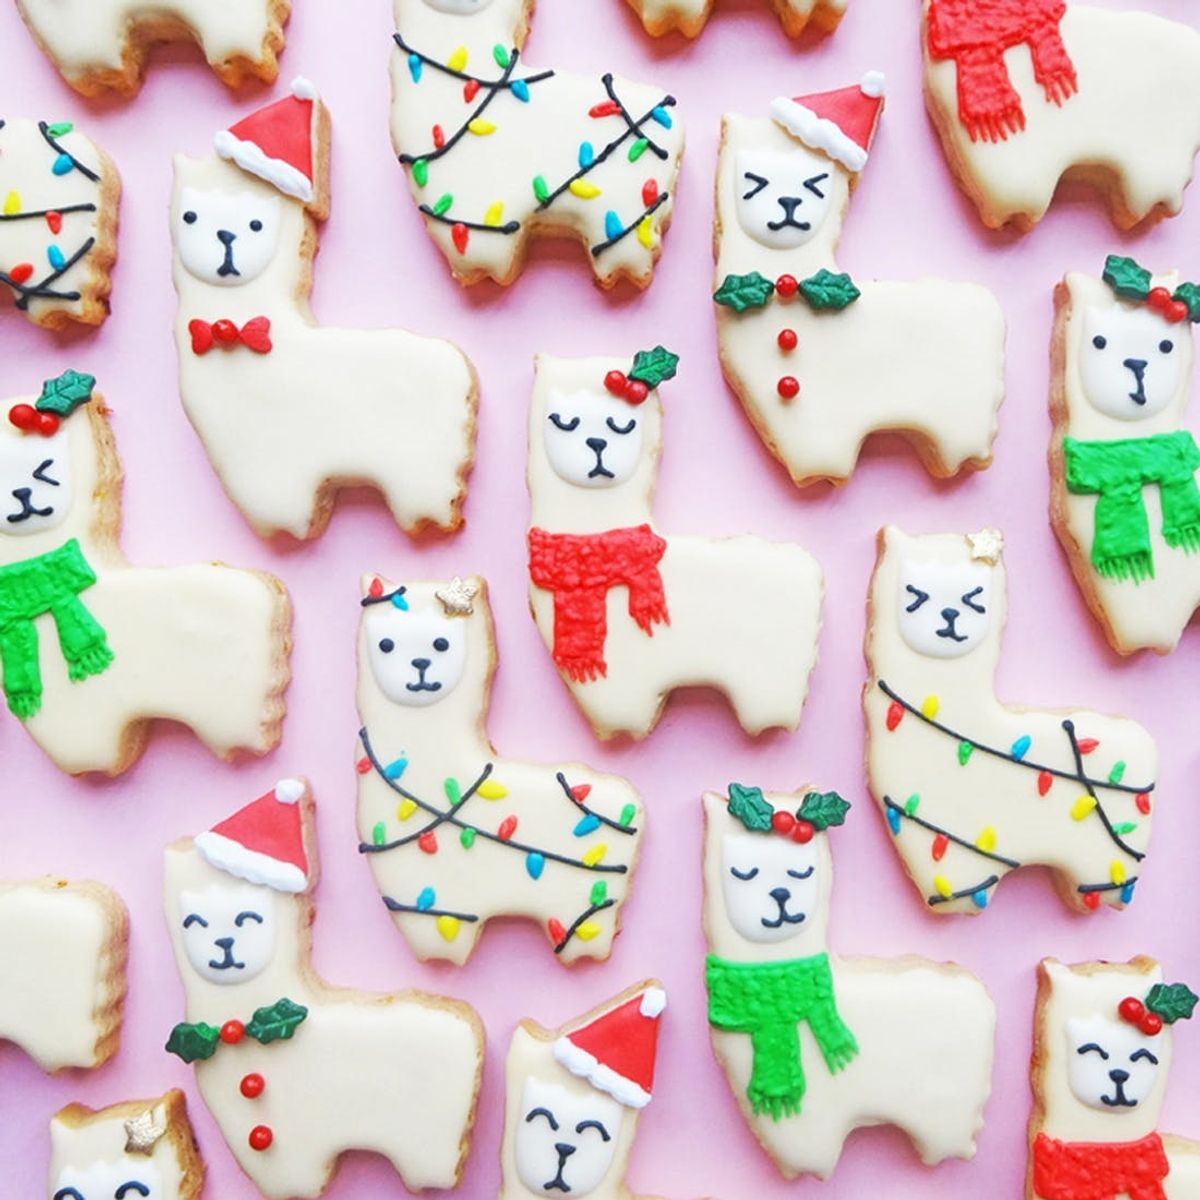 Make This Llama Orange-Spiced Cookies Recipe for the Holidays